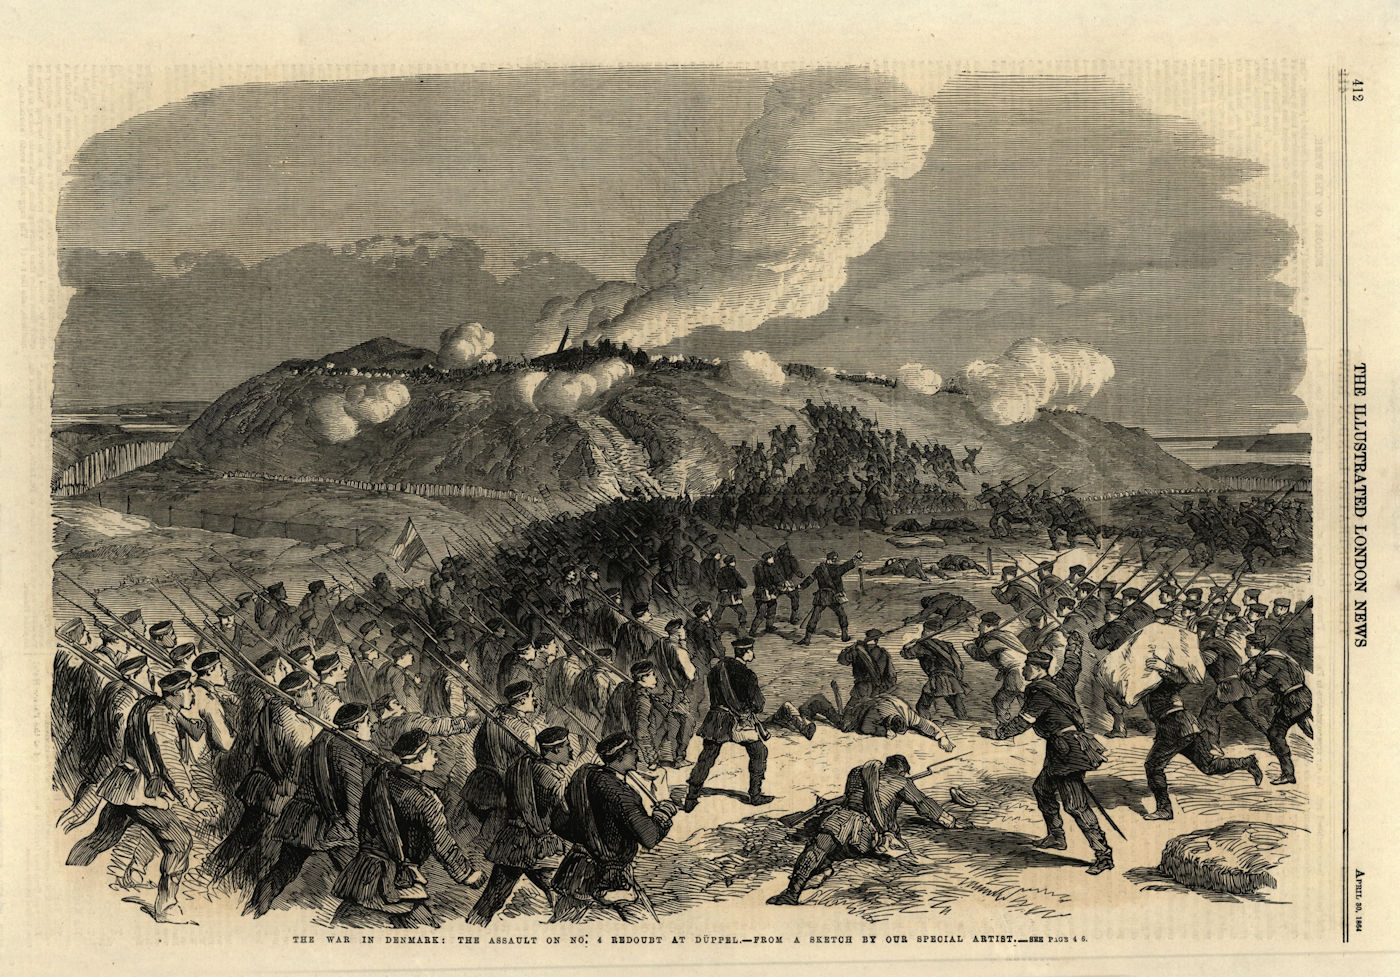 The war in Denmark: the assault on No. 4 redoubt at Dybbol. Militaria 1864